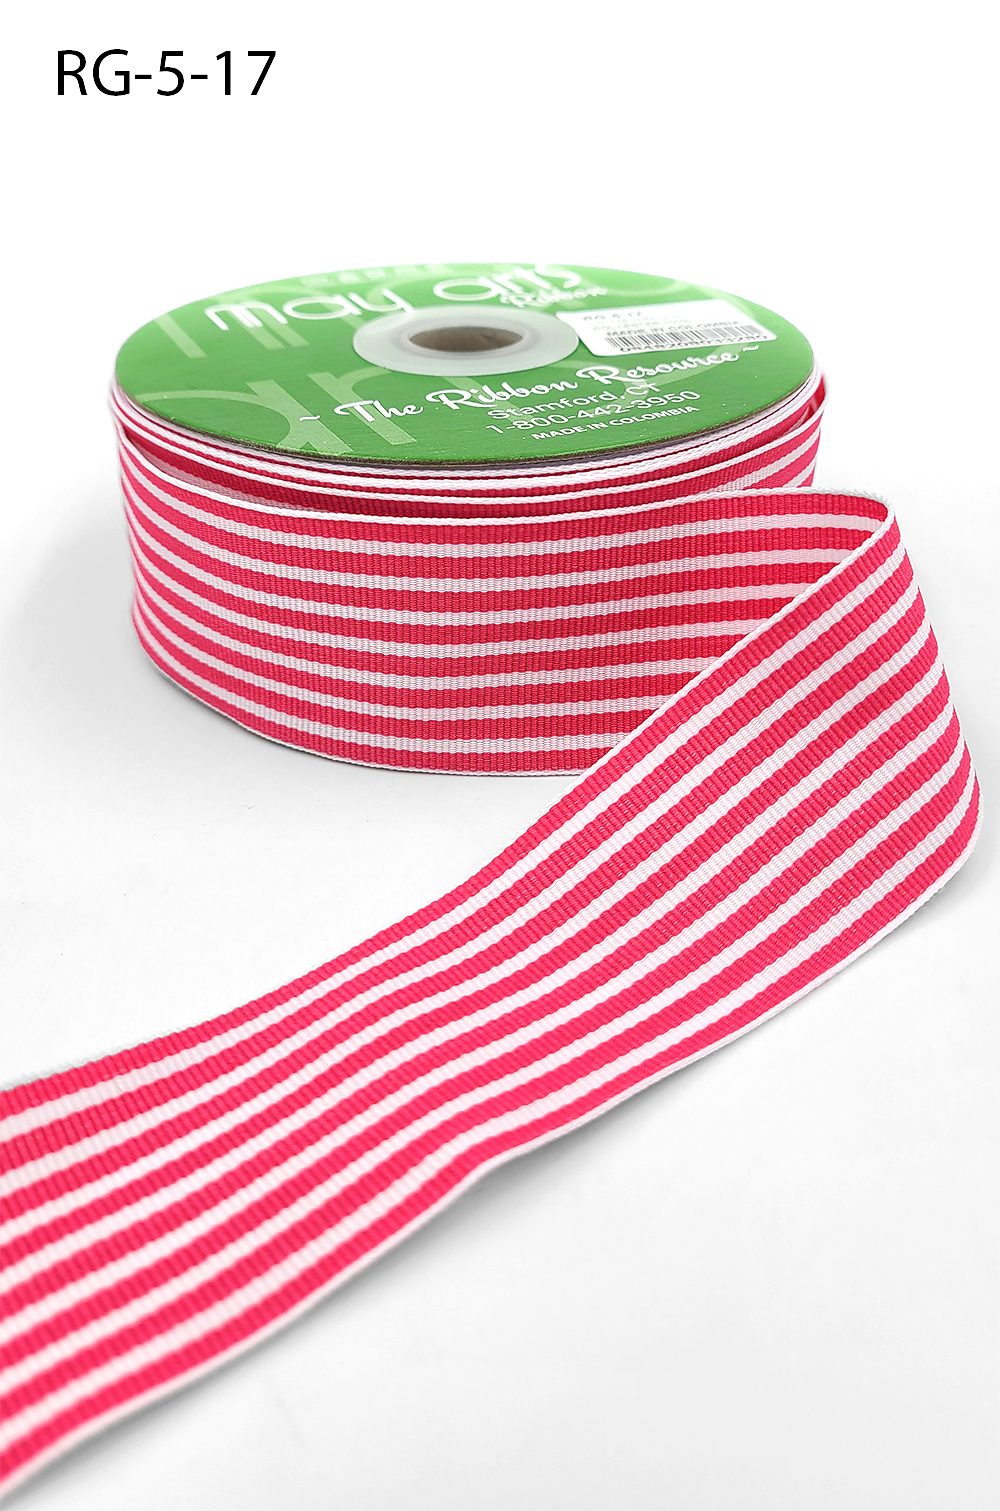 Ribbon Bazaar Mono Striped Grosgrain Ribbon Woven Ribbed Texture - 100%  Polyester Ribbon for Gift Wrapping, Home Decor, Bouquets, Cake Decorating 